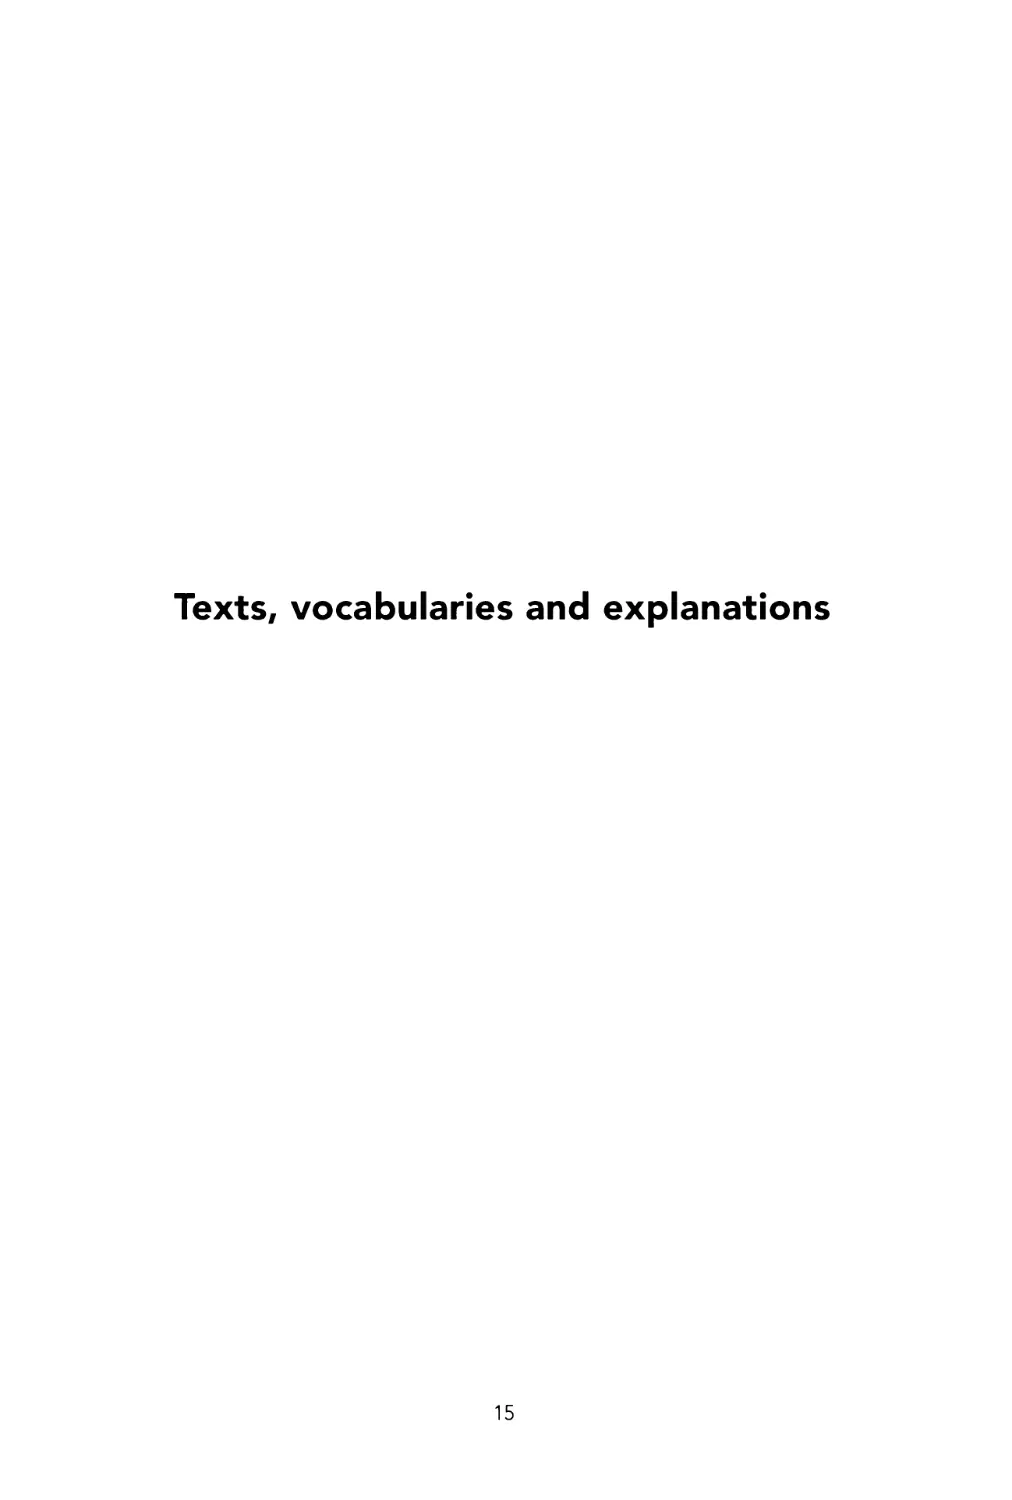 Texts, vocabularies and explanations